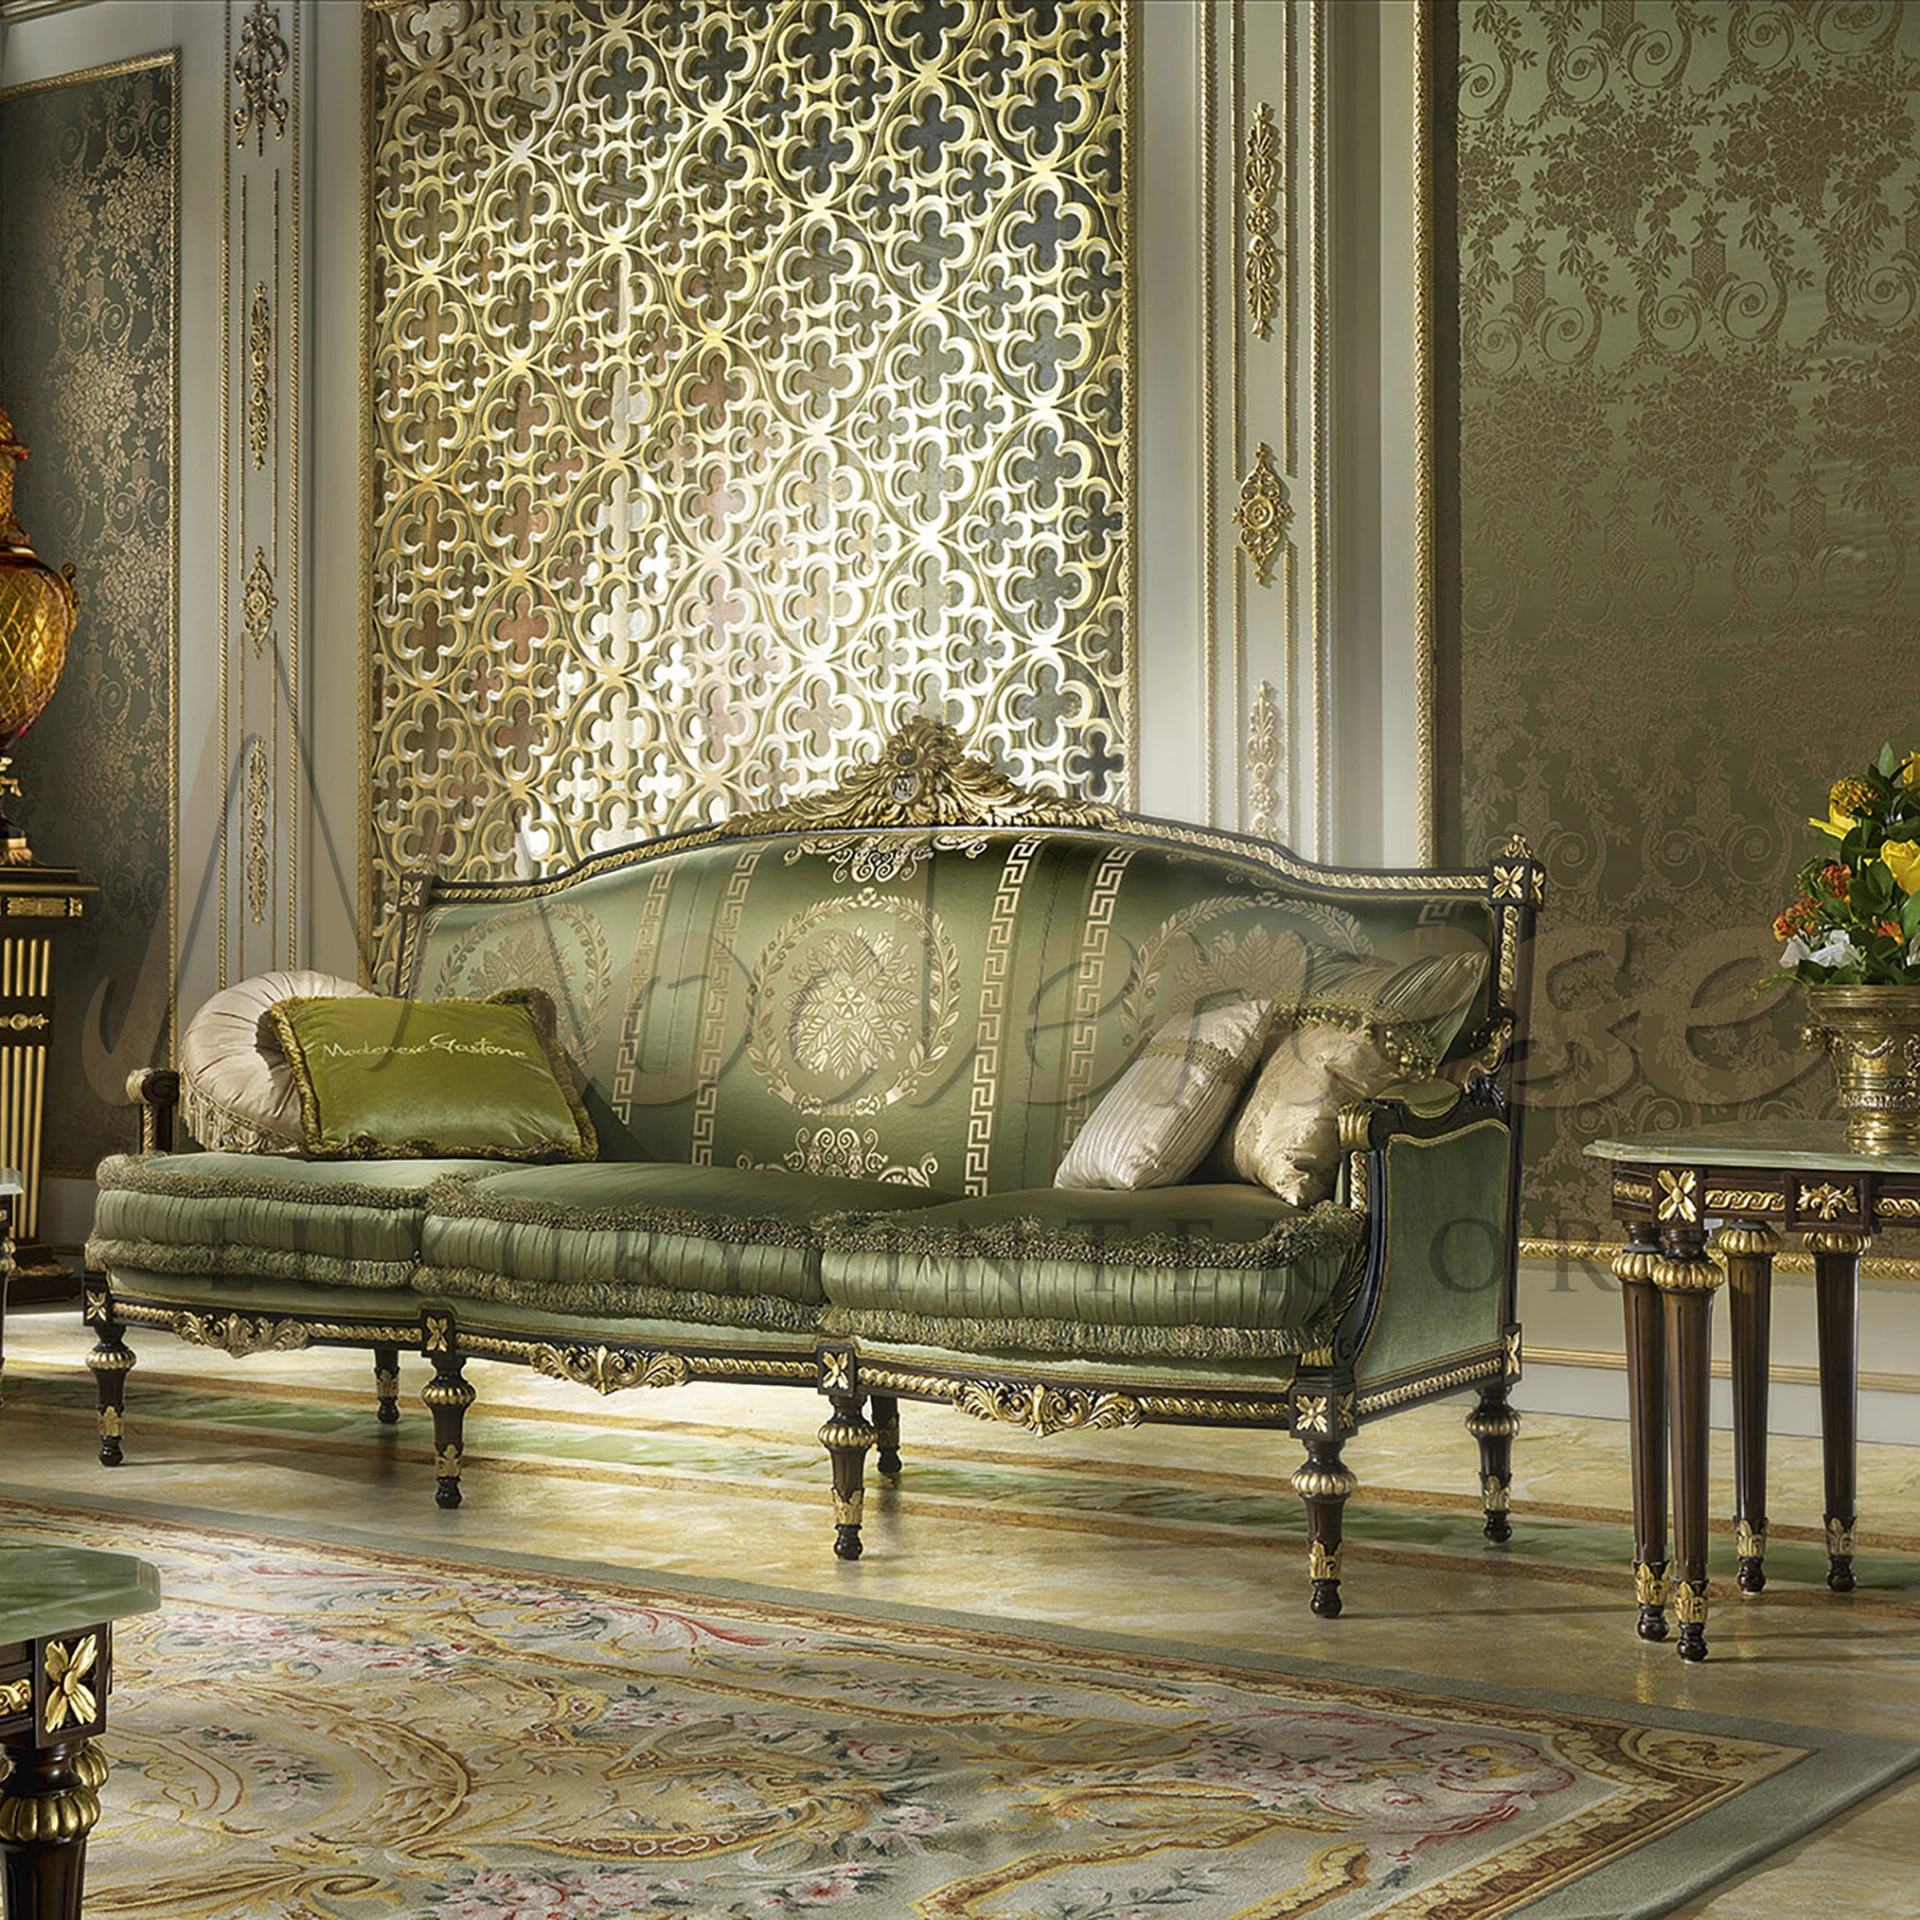 Classic Green Victorian Sofa: Elegance in Damask Upholstery